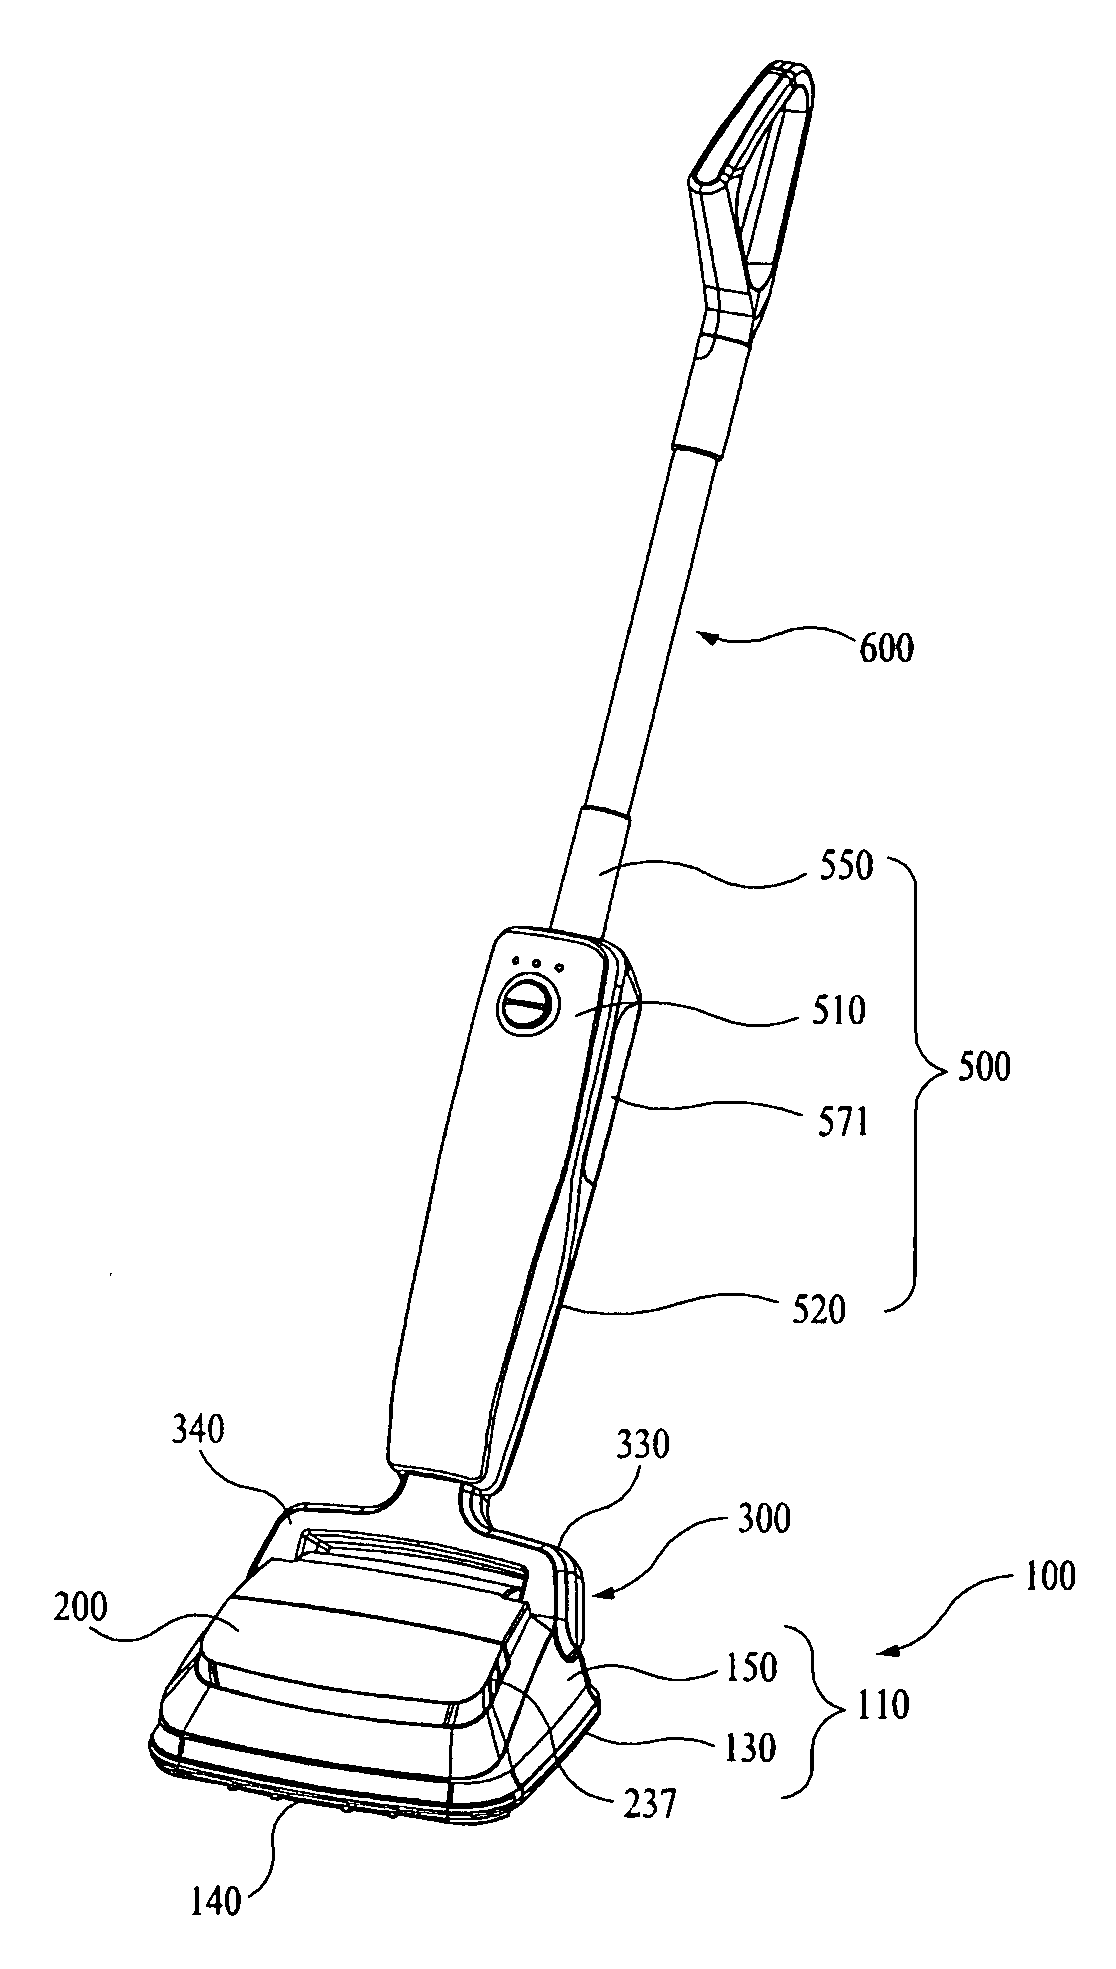 Dust receptacle and steam vaccum cleaner